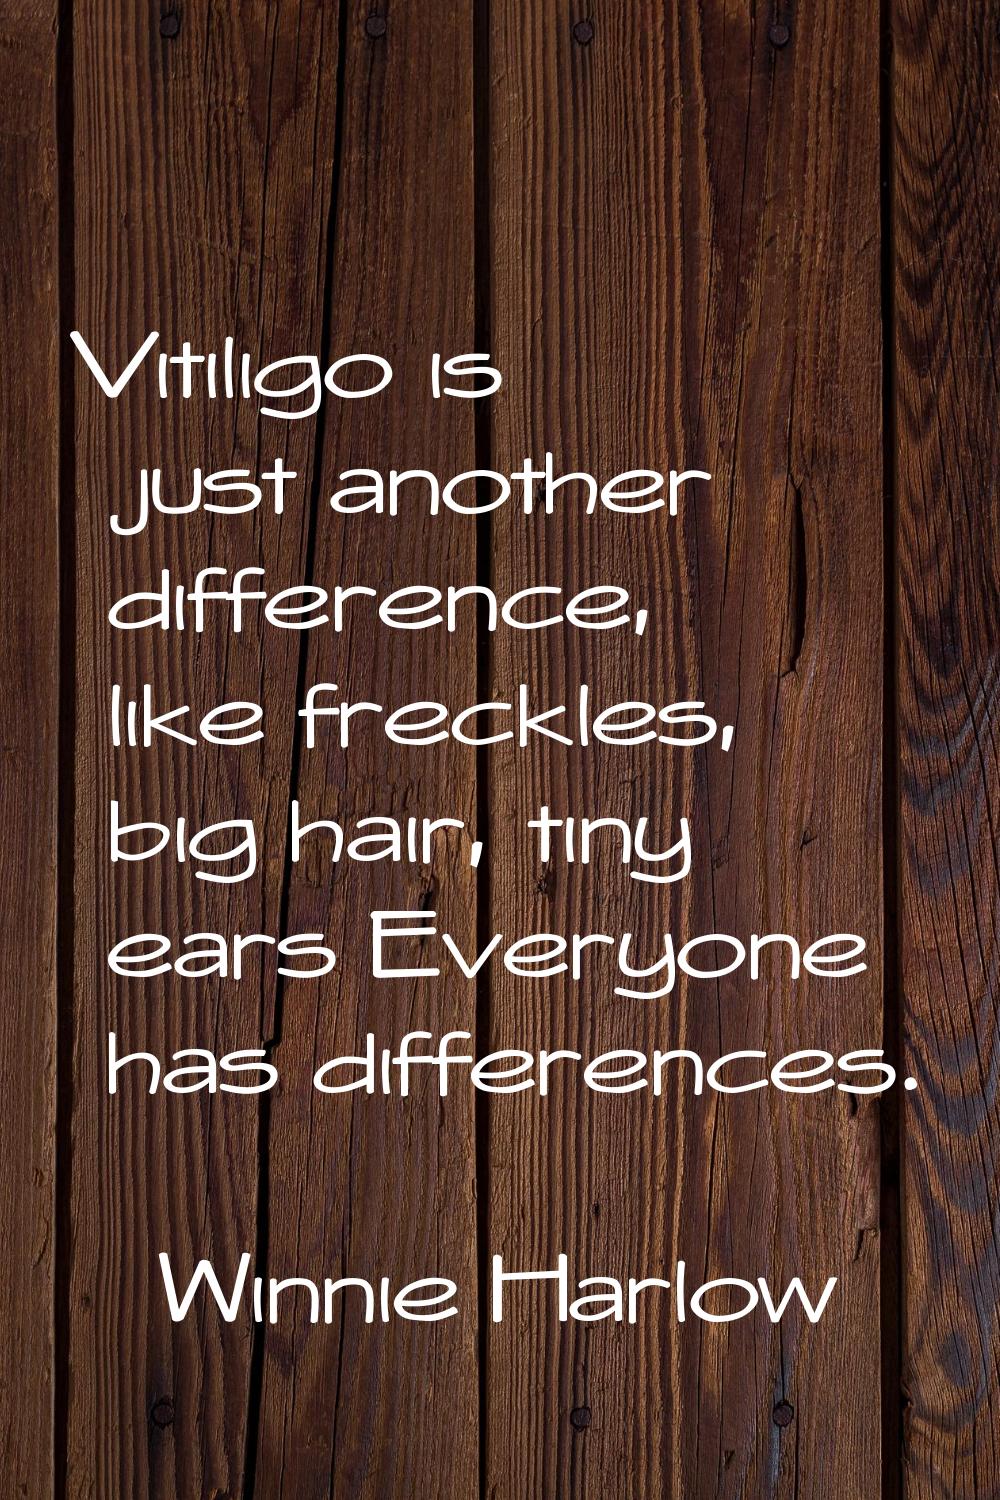 Vitiligo is just another difference, like freckles, big hair, tiny ears Everyone has differences.